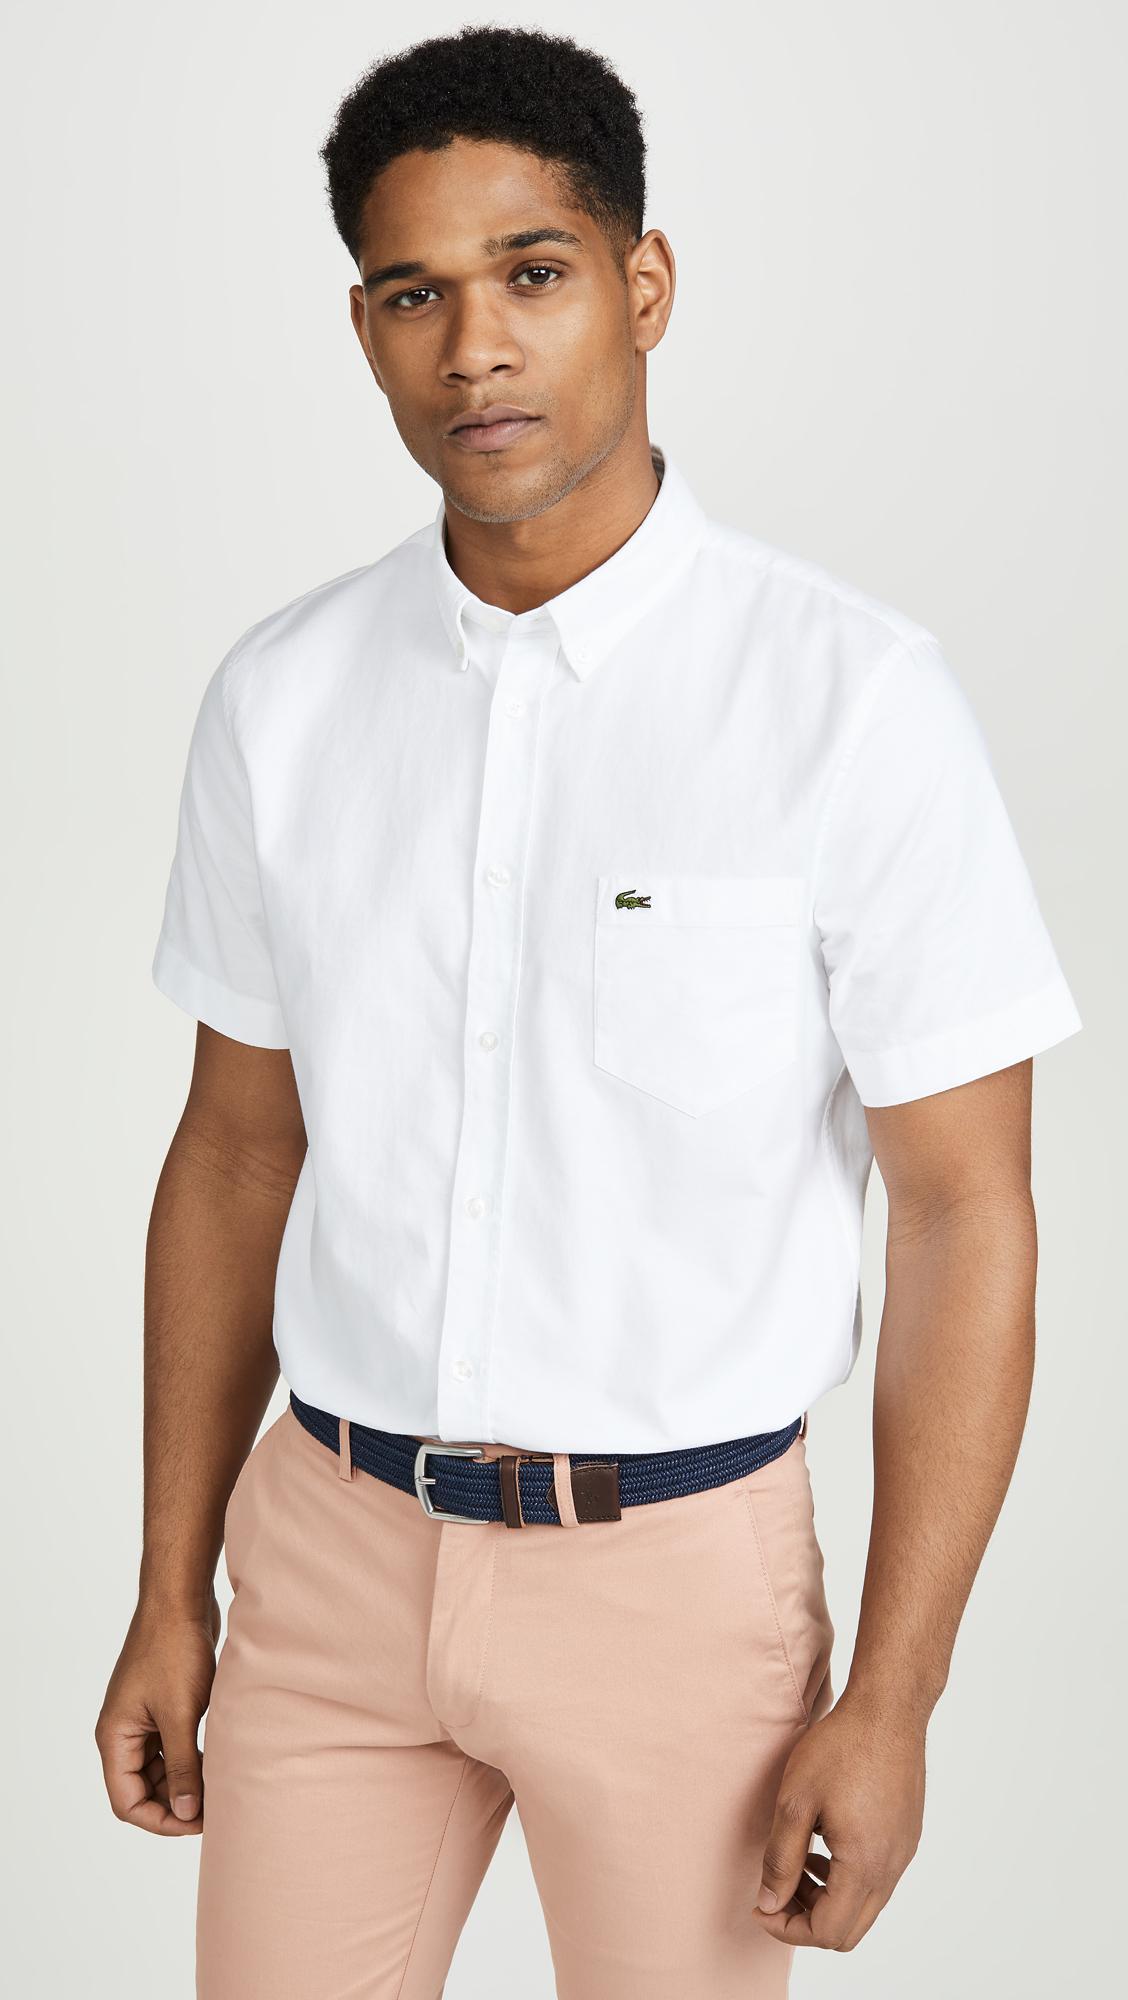 Lacoste Short Sleeve Button Down Oxford Shirt in White for Men - Lyst